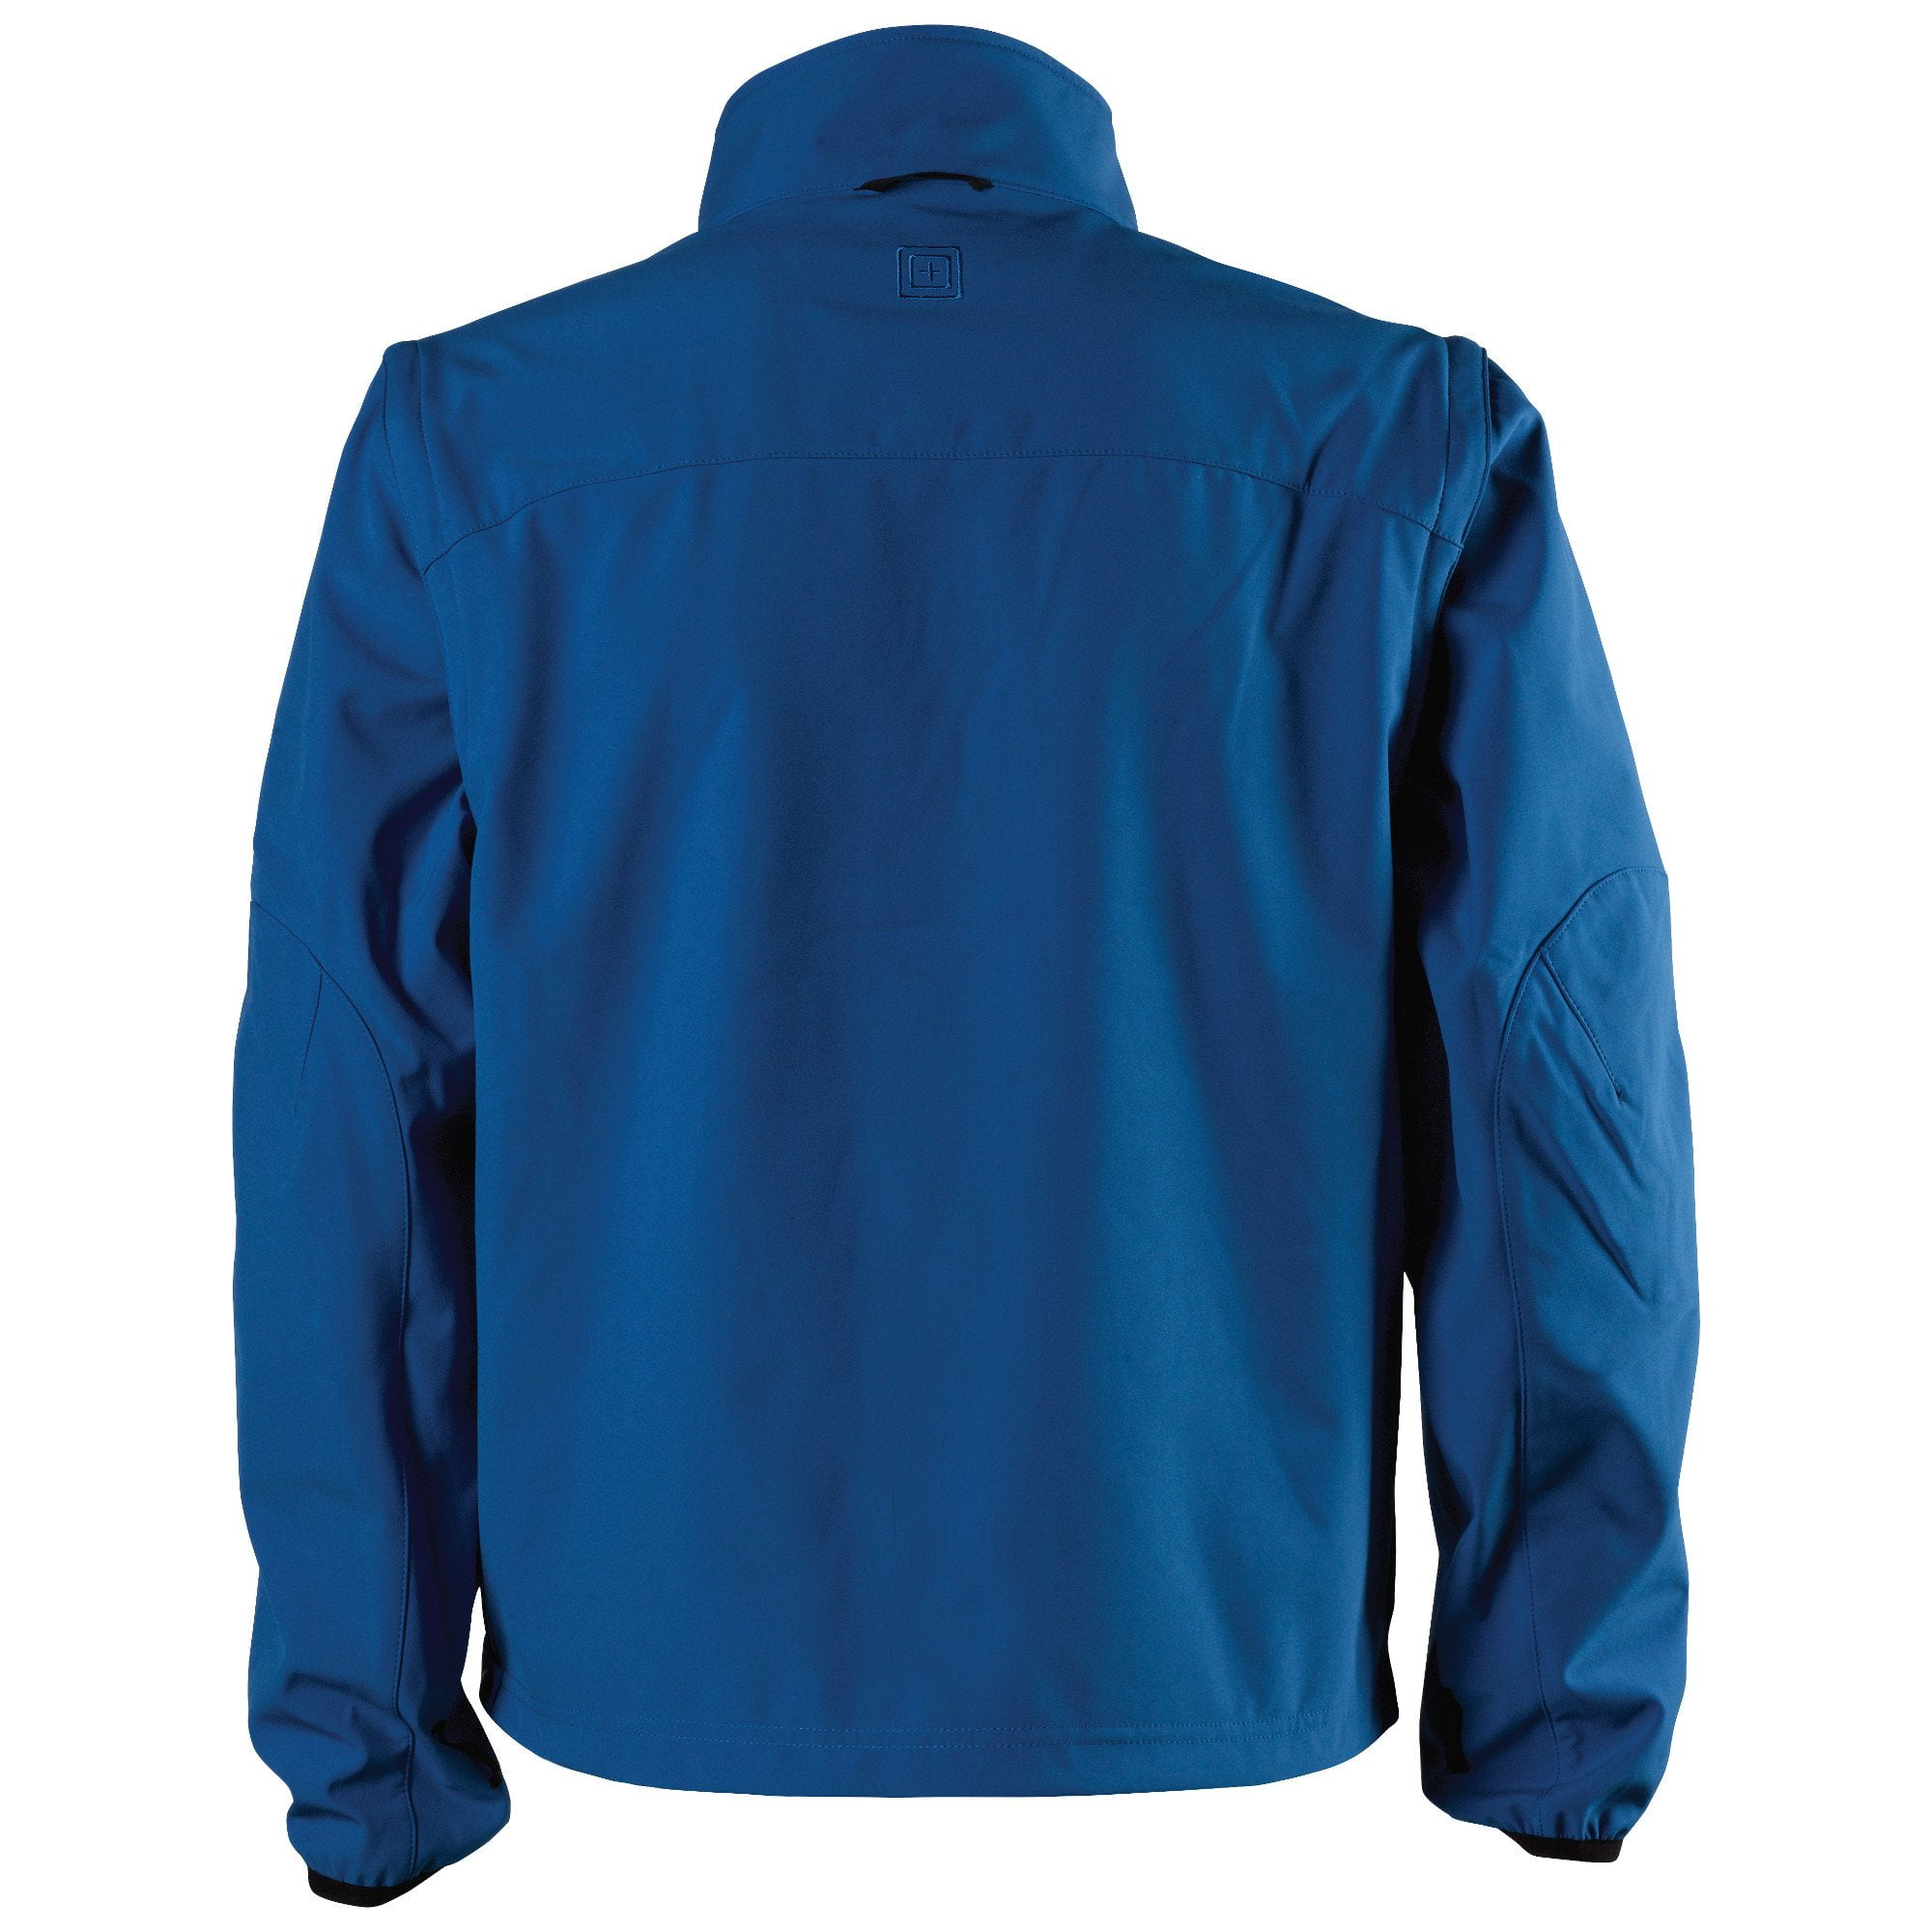 5.11 Work Gear First Responder Hi-Visibility Jacket, Superior All-Weather  Protection, Royal Blue, 2X-Large/Tall, Style 48198T